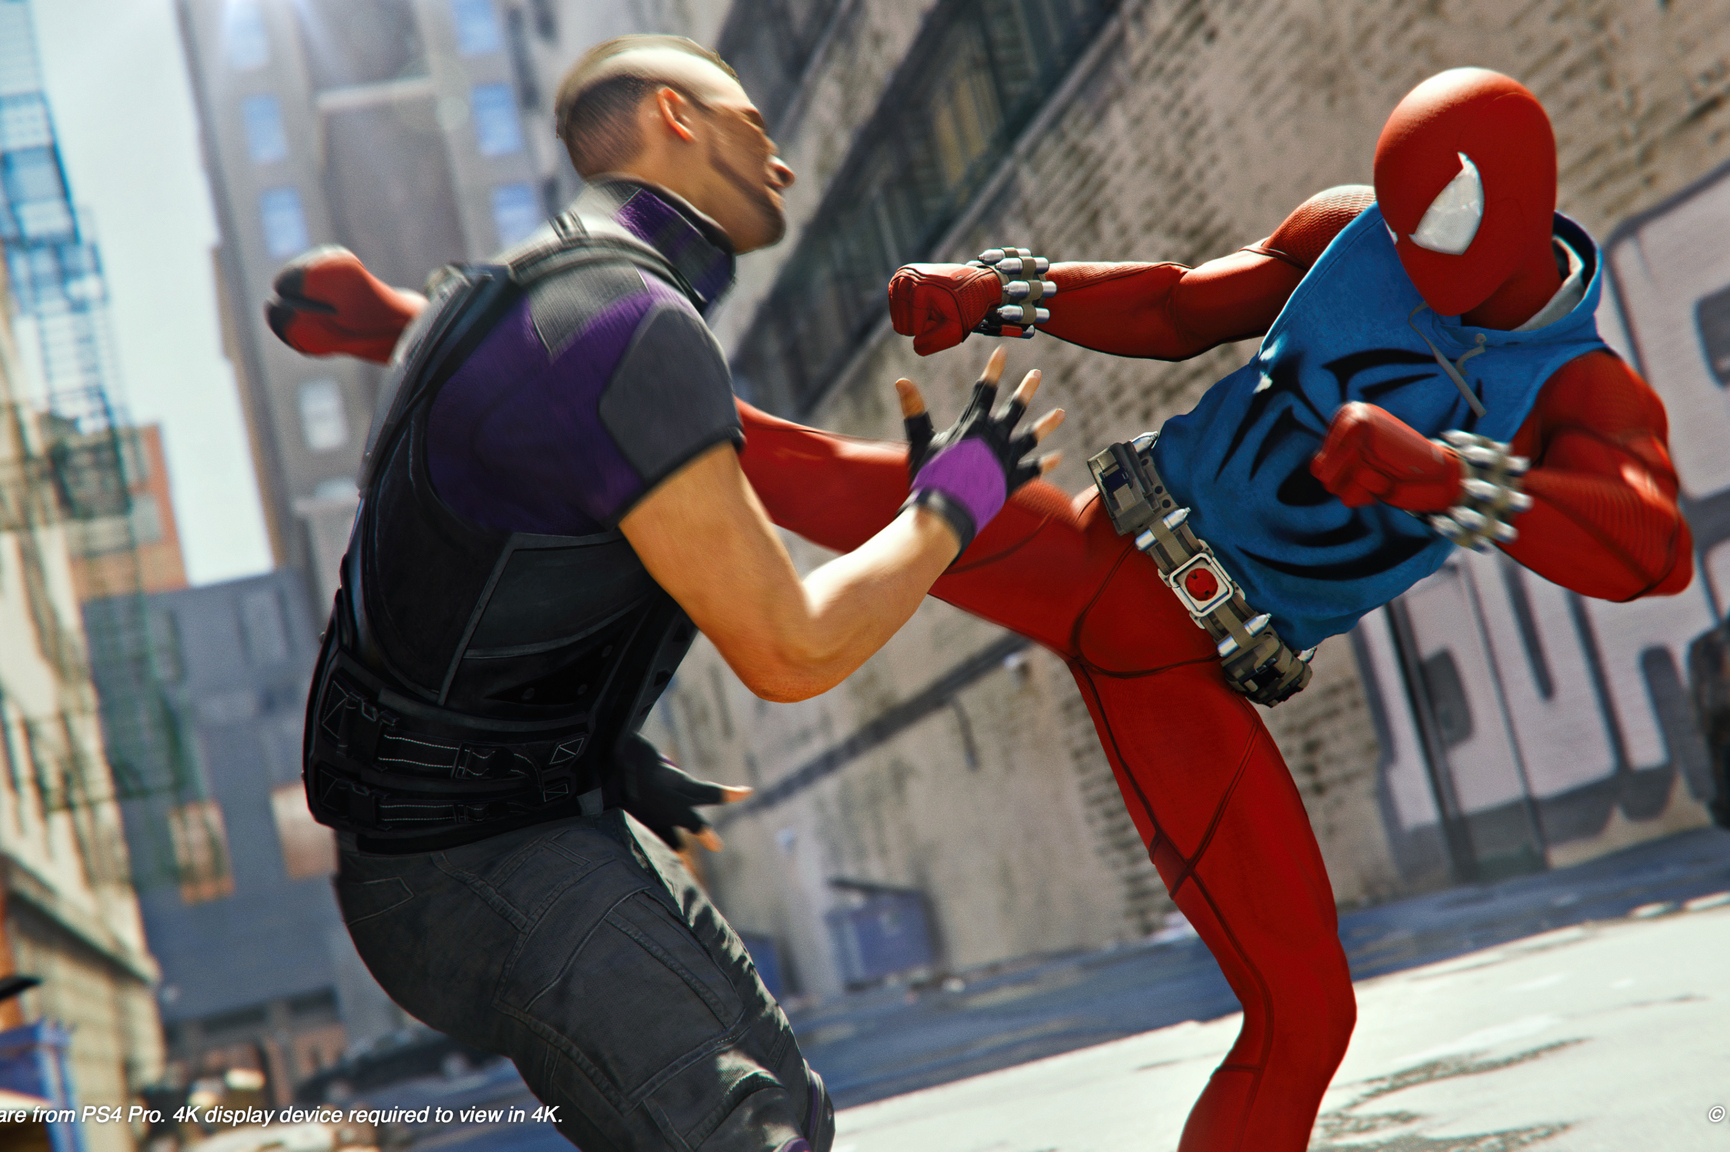 Spider-Man PS4 Review: Gameplay Impressions, Speedrunning Tips and Appeal, News, Scores, Highlights, Stats, and Rumors